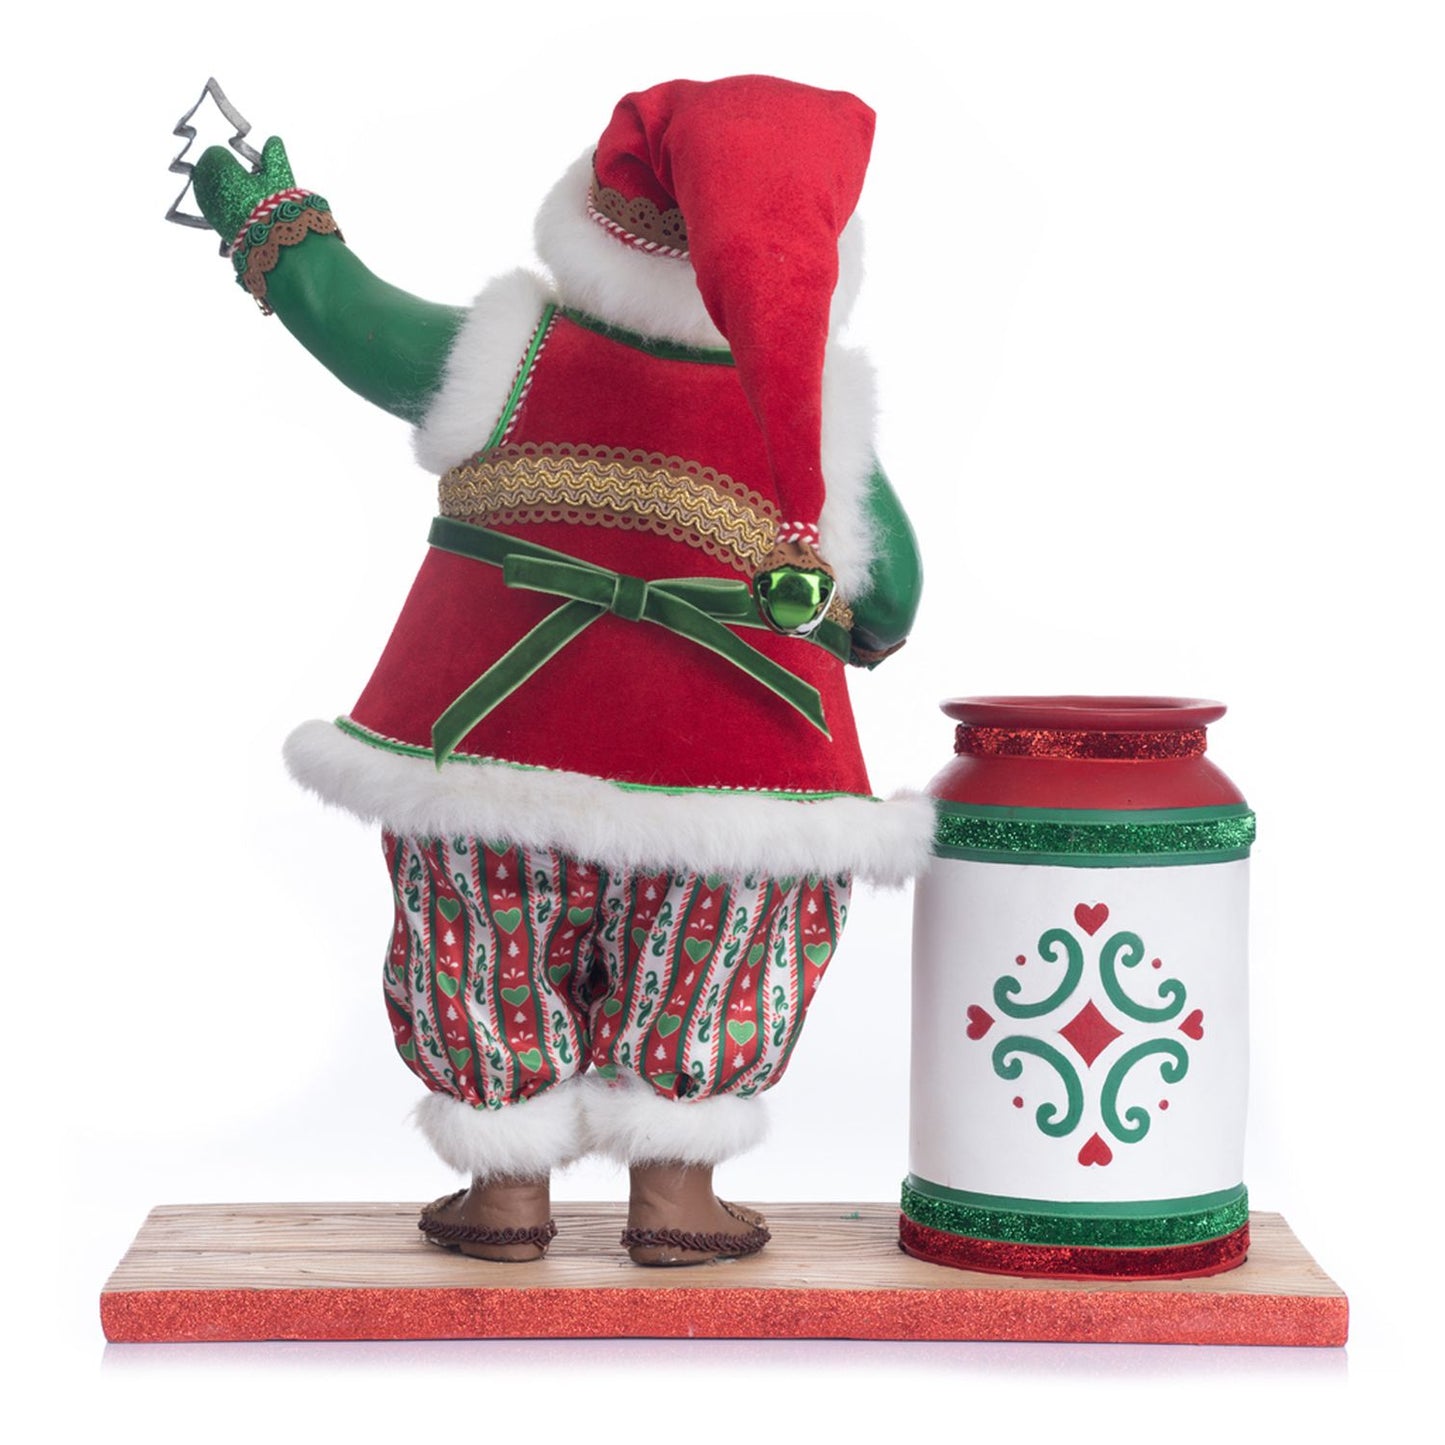 Katherine's Collection Santa with Utensil Canister, 15.25x6x15.5 Inches, Green/White